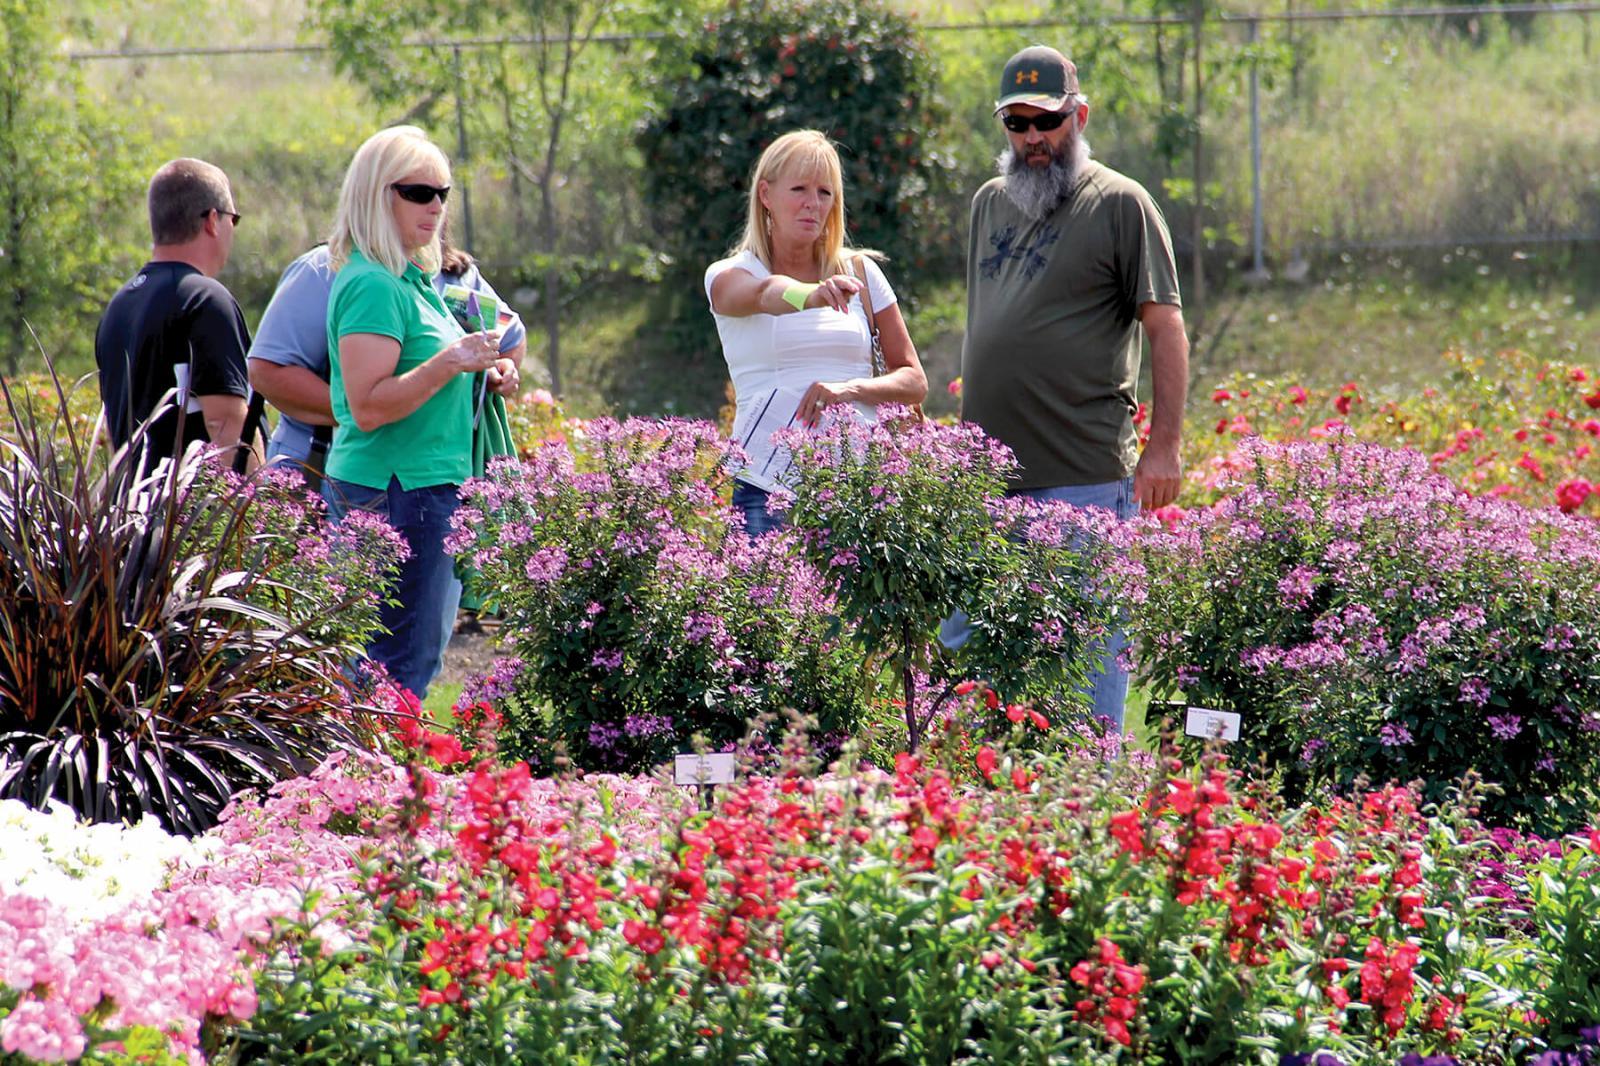 LO and University of Guelph host tours of trial gardens